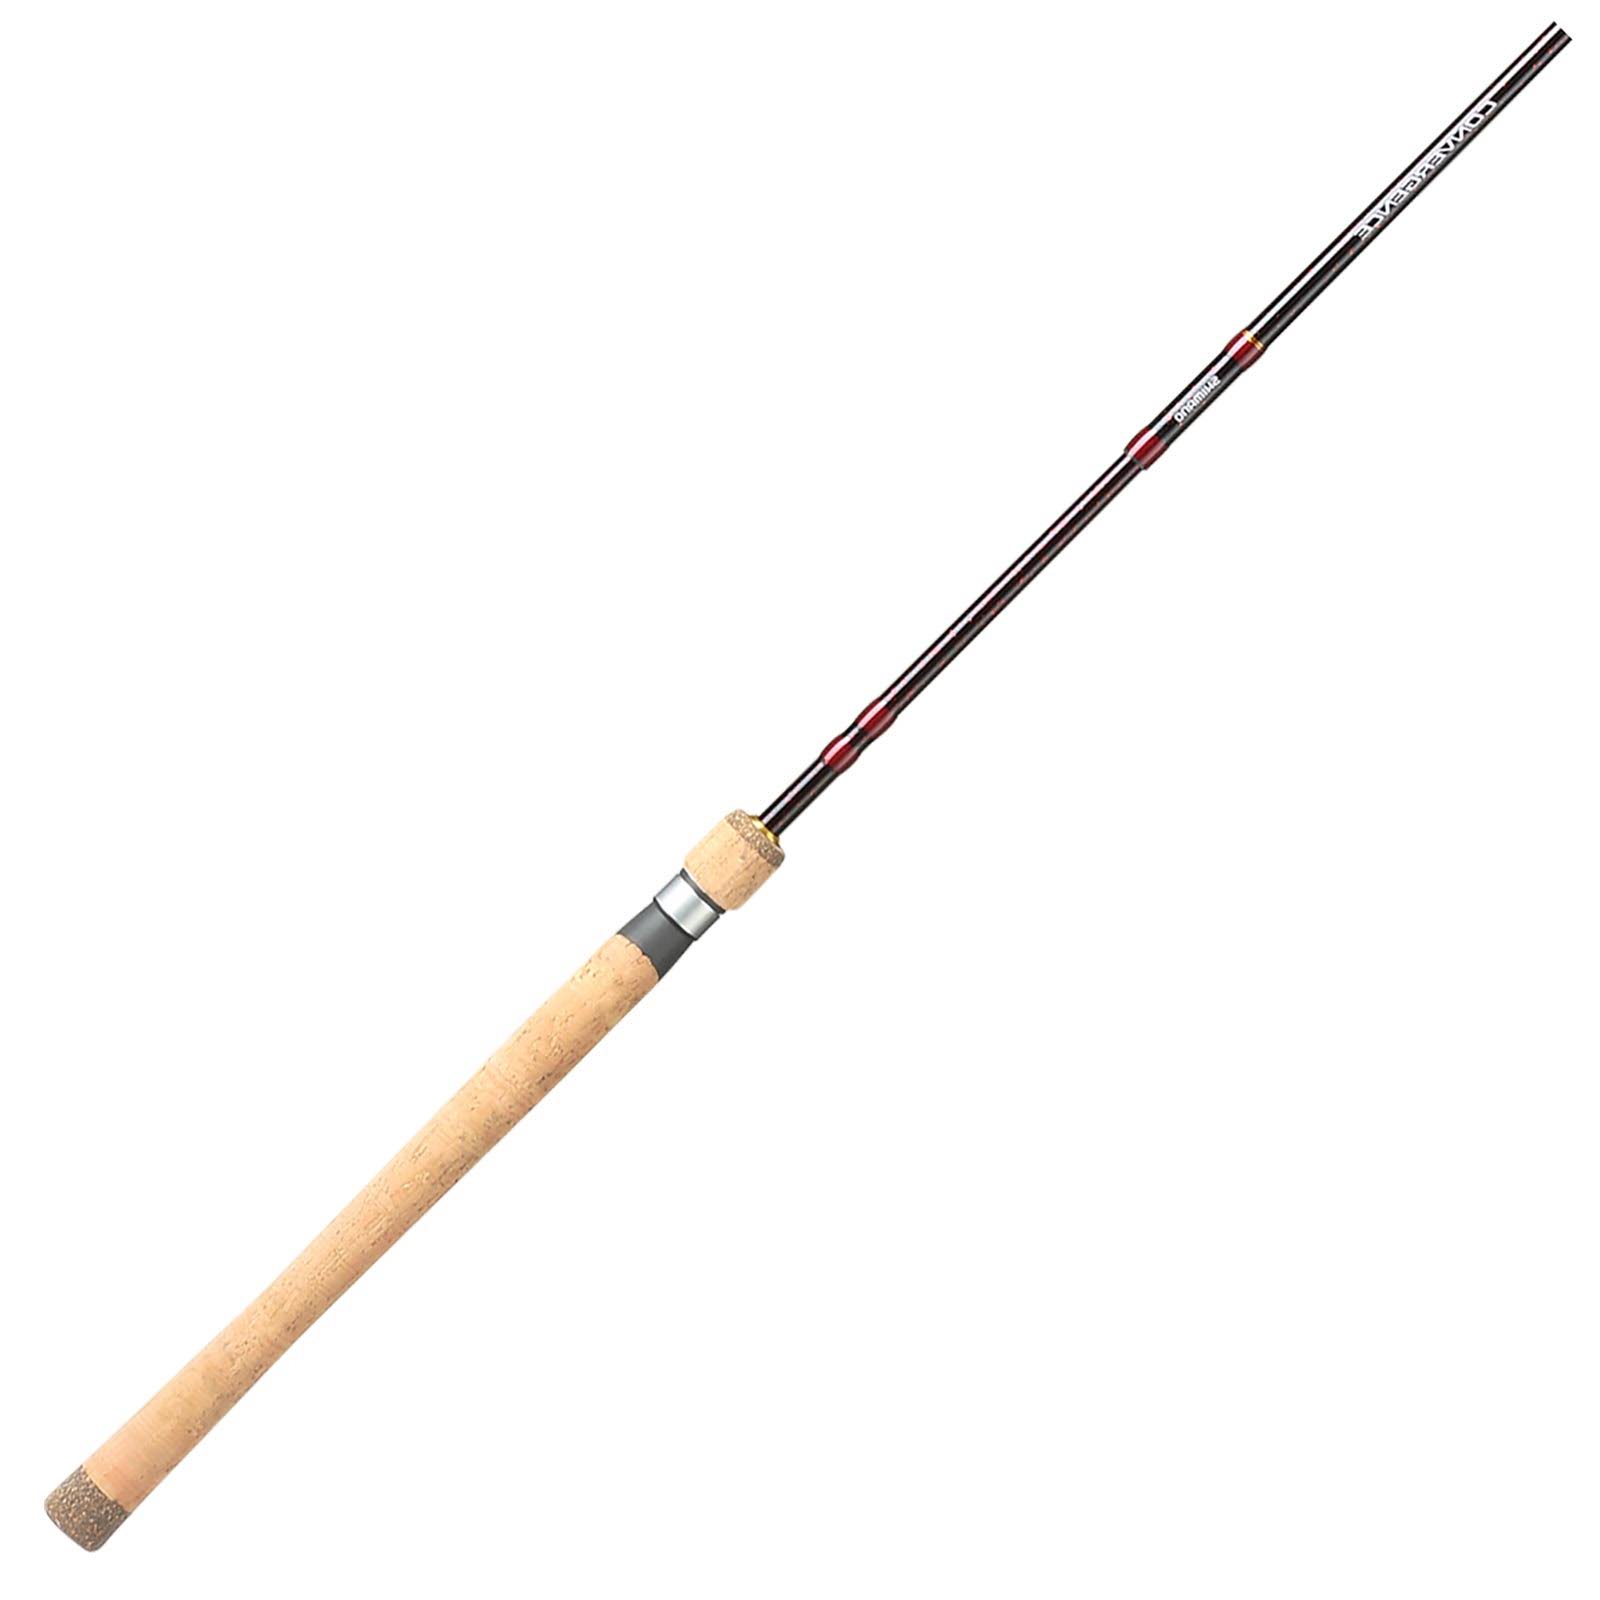 Shimano Exage Bx STC Mini Tele Spin Travel Rod 7ft 7-21g - 10 Section